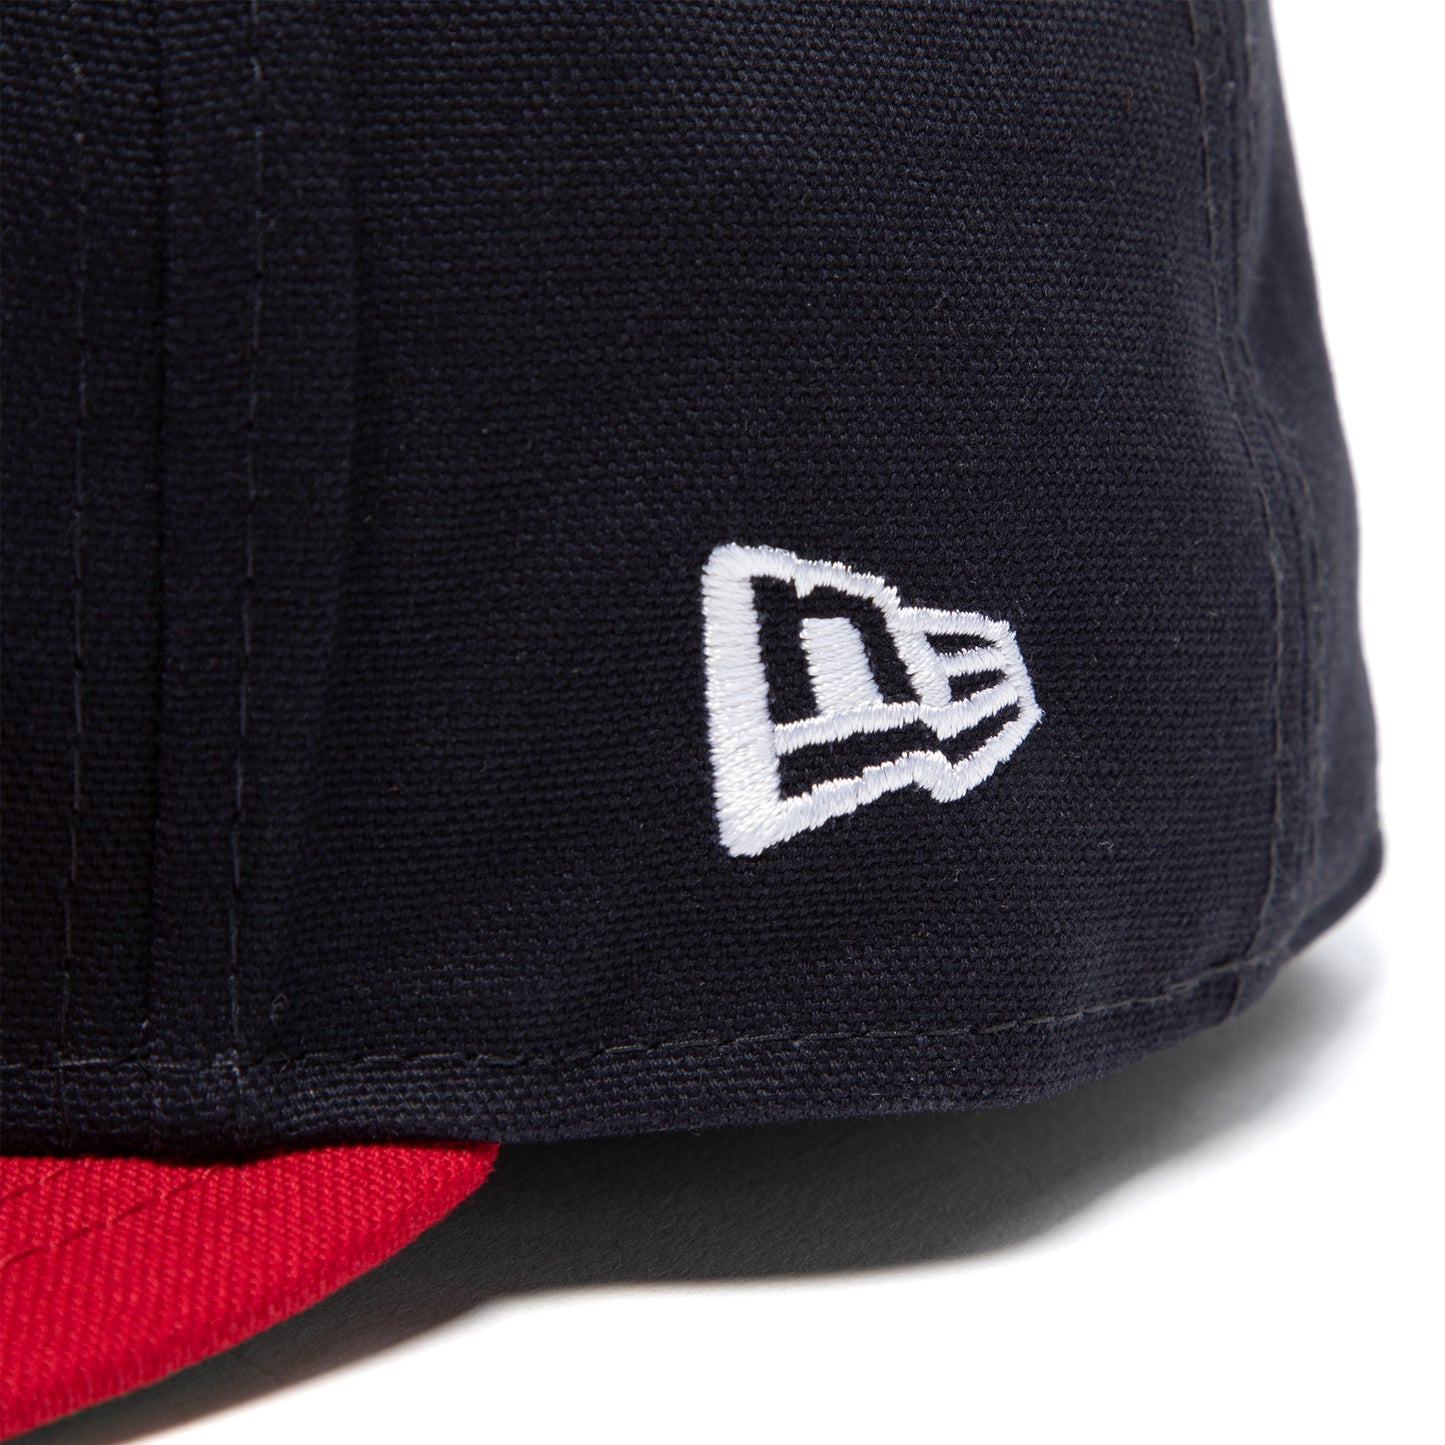 New Era x Eric Emanuel Boston Red Sox Fitted Hat (Navy/Red)